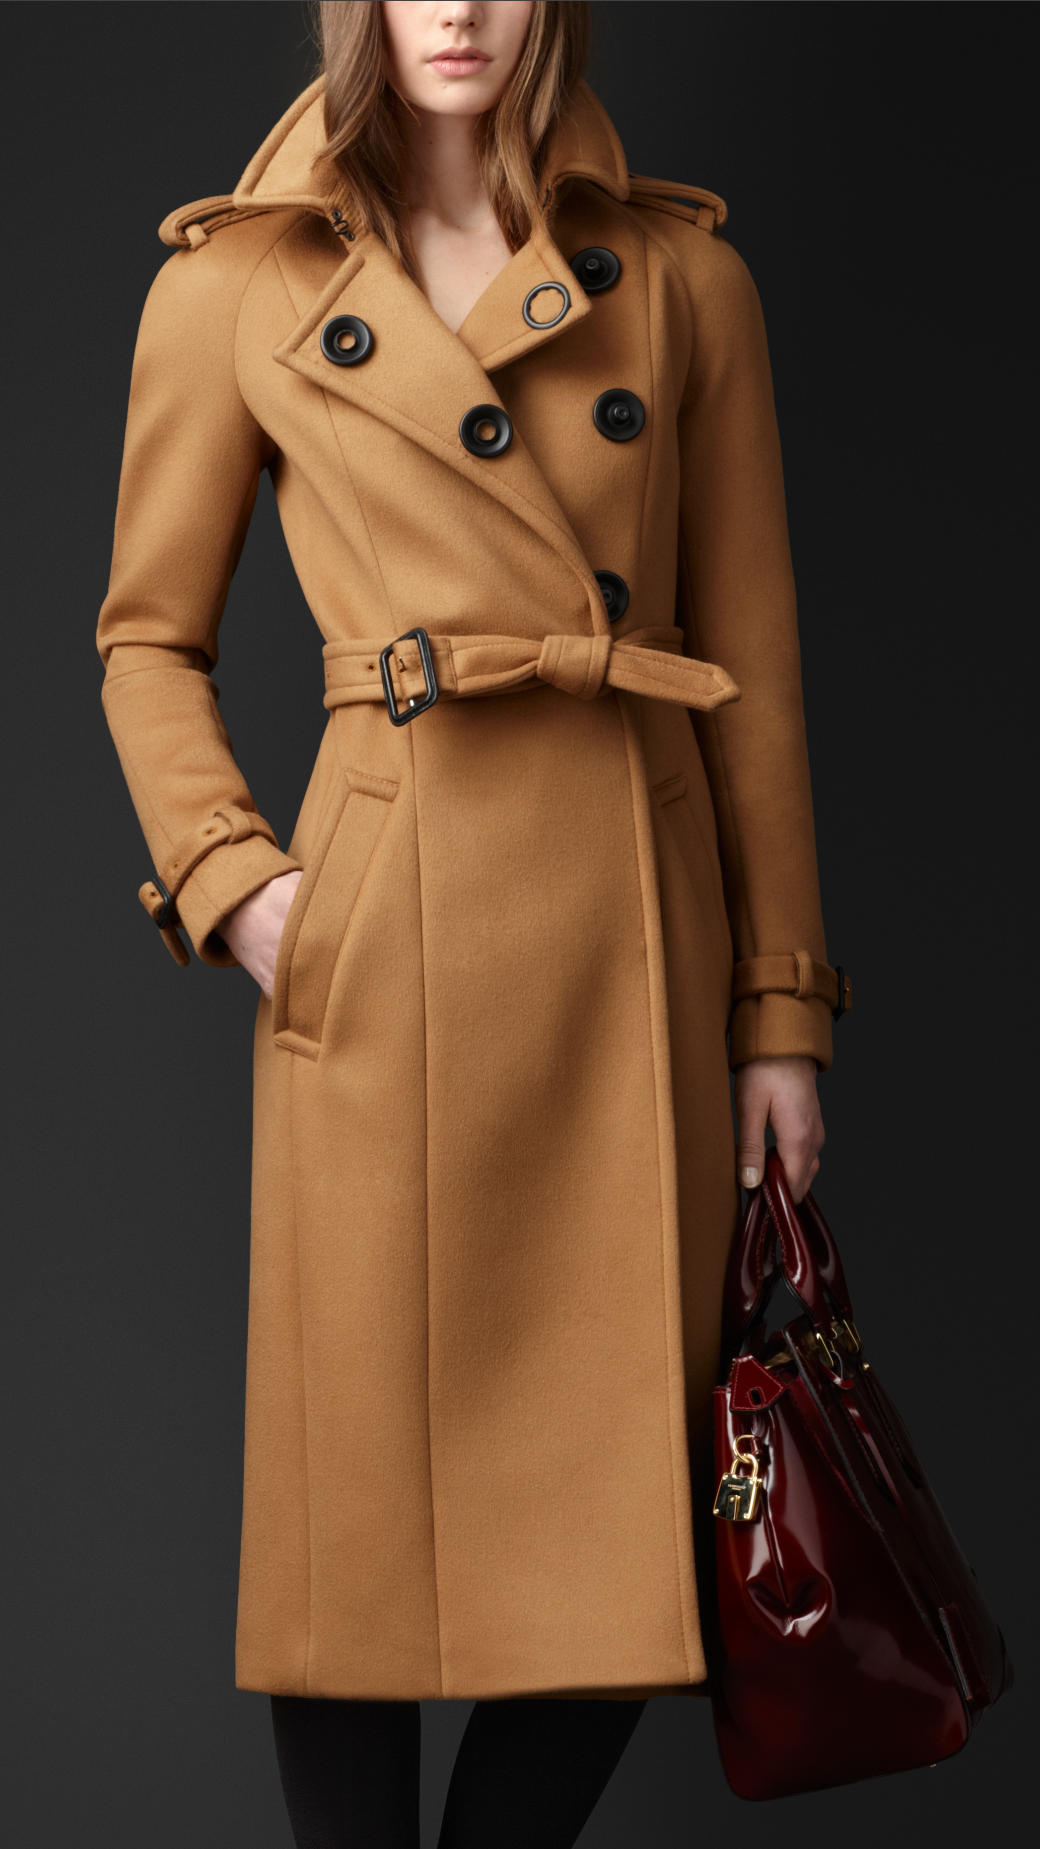 Lyst - Burberry Bonded Cashmere Trench Coat in Natural